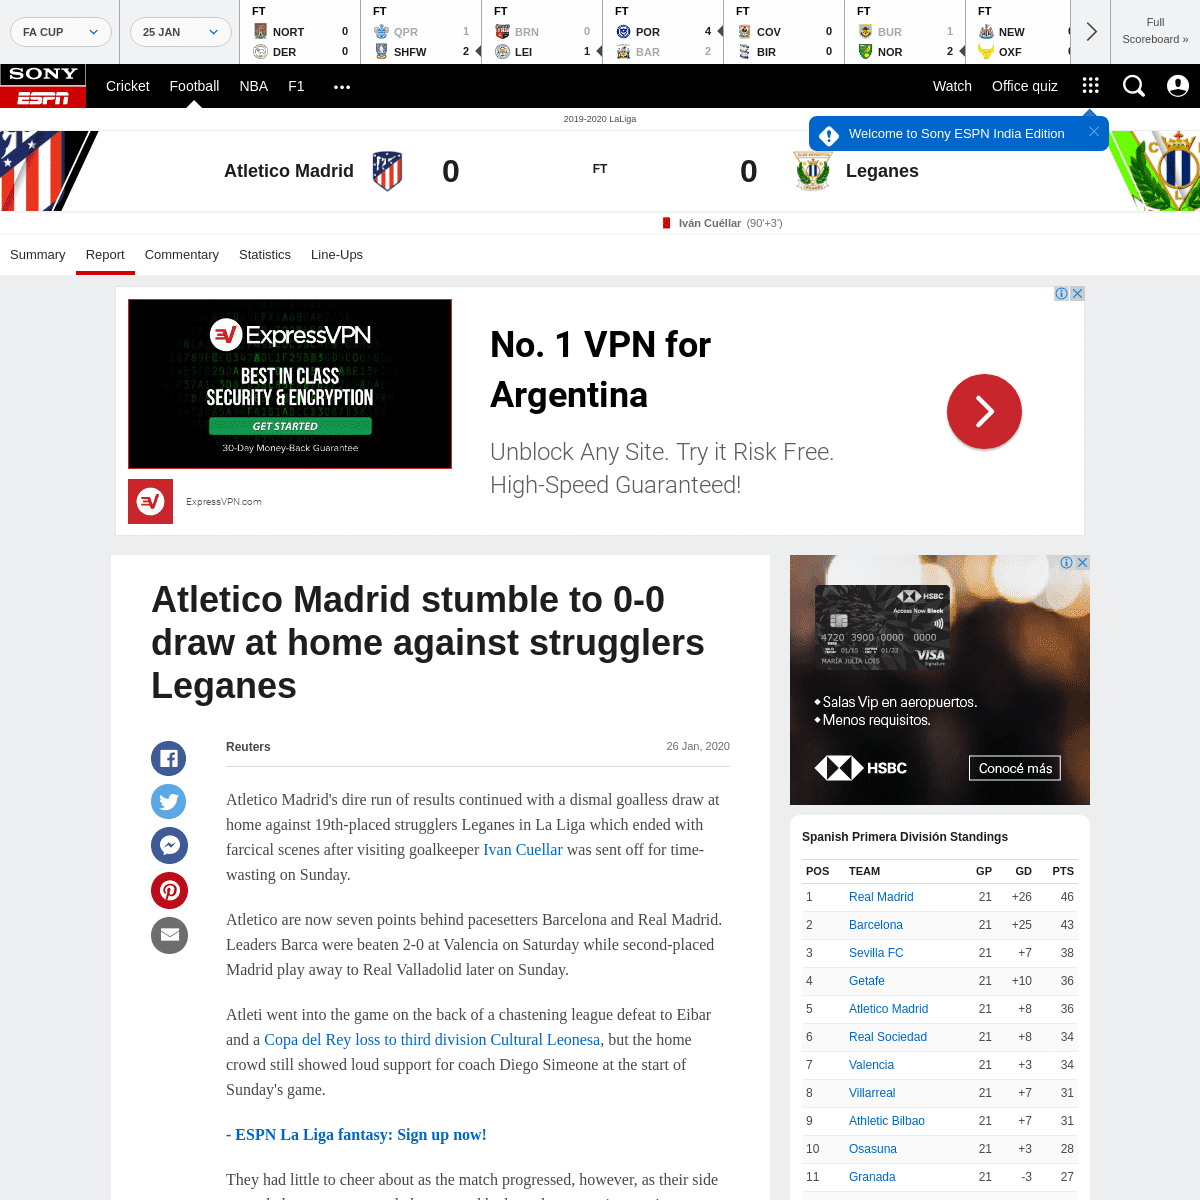 A complete backup of www.espn.in/football/report?gameId=550408